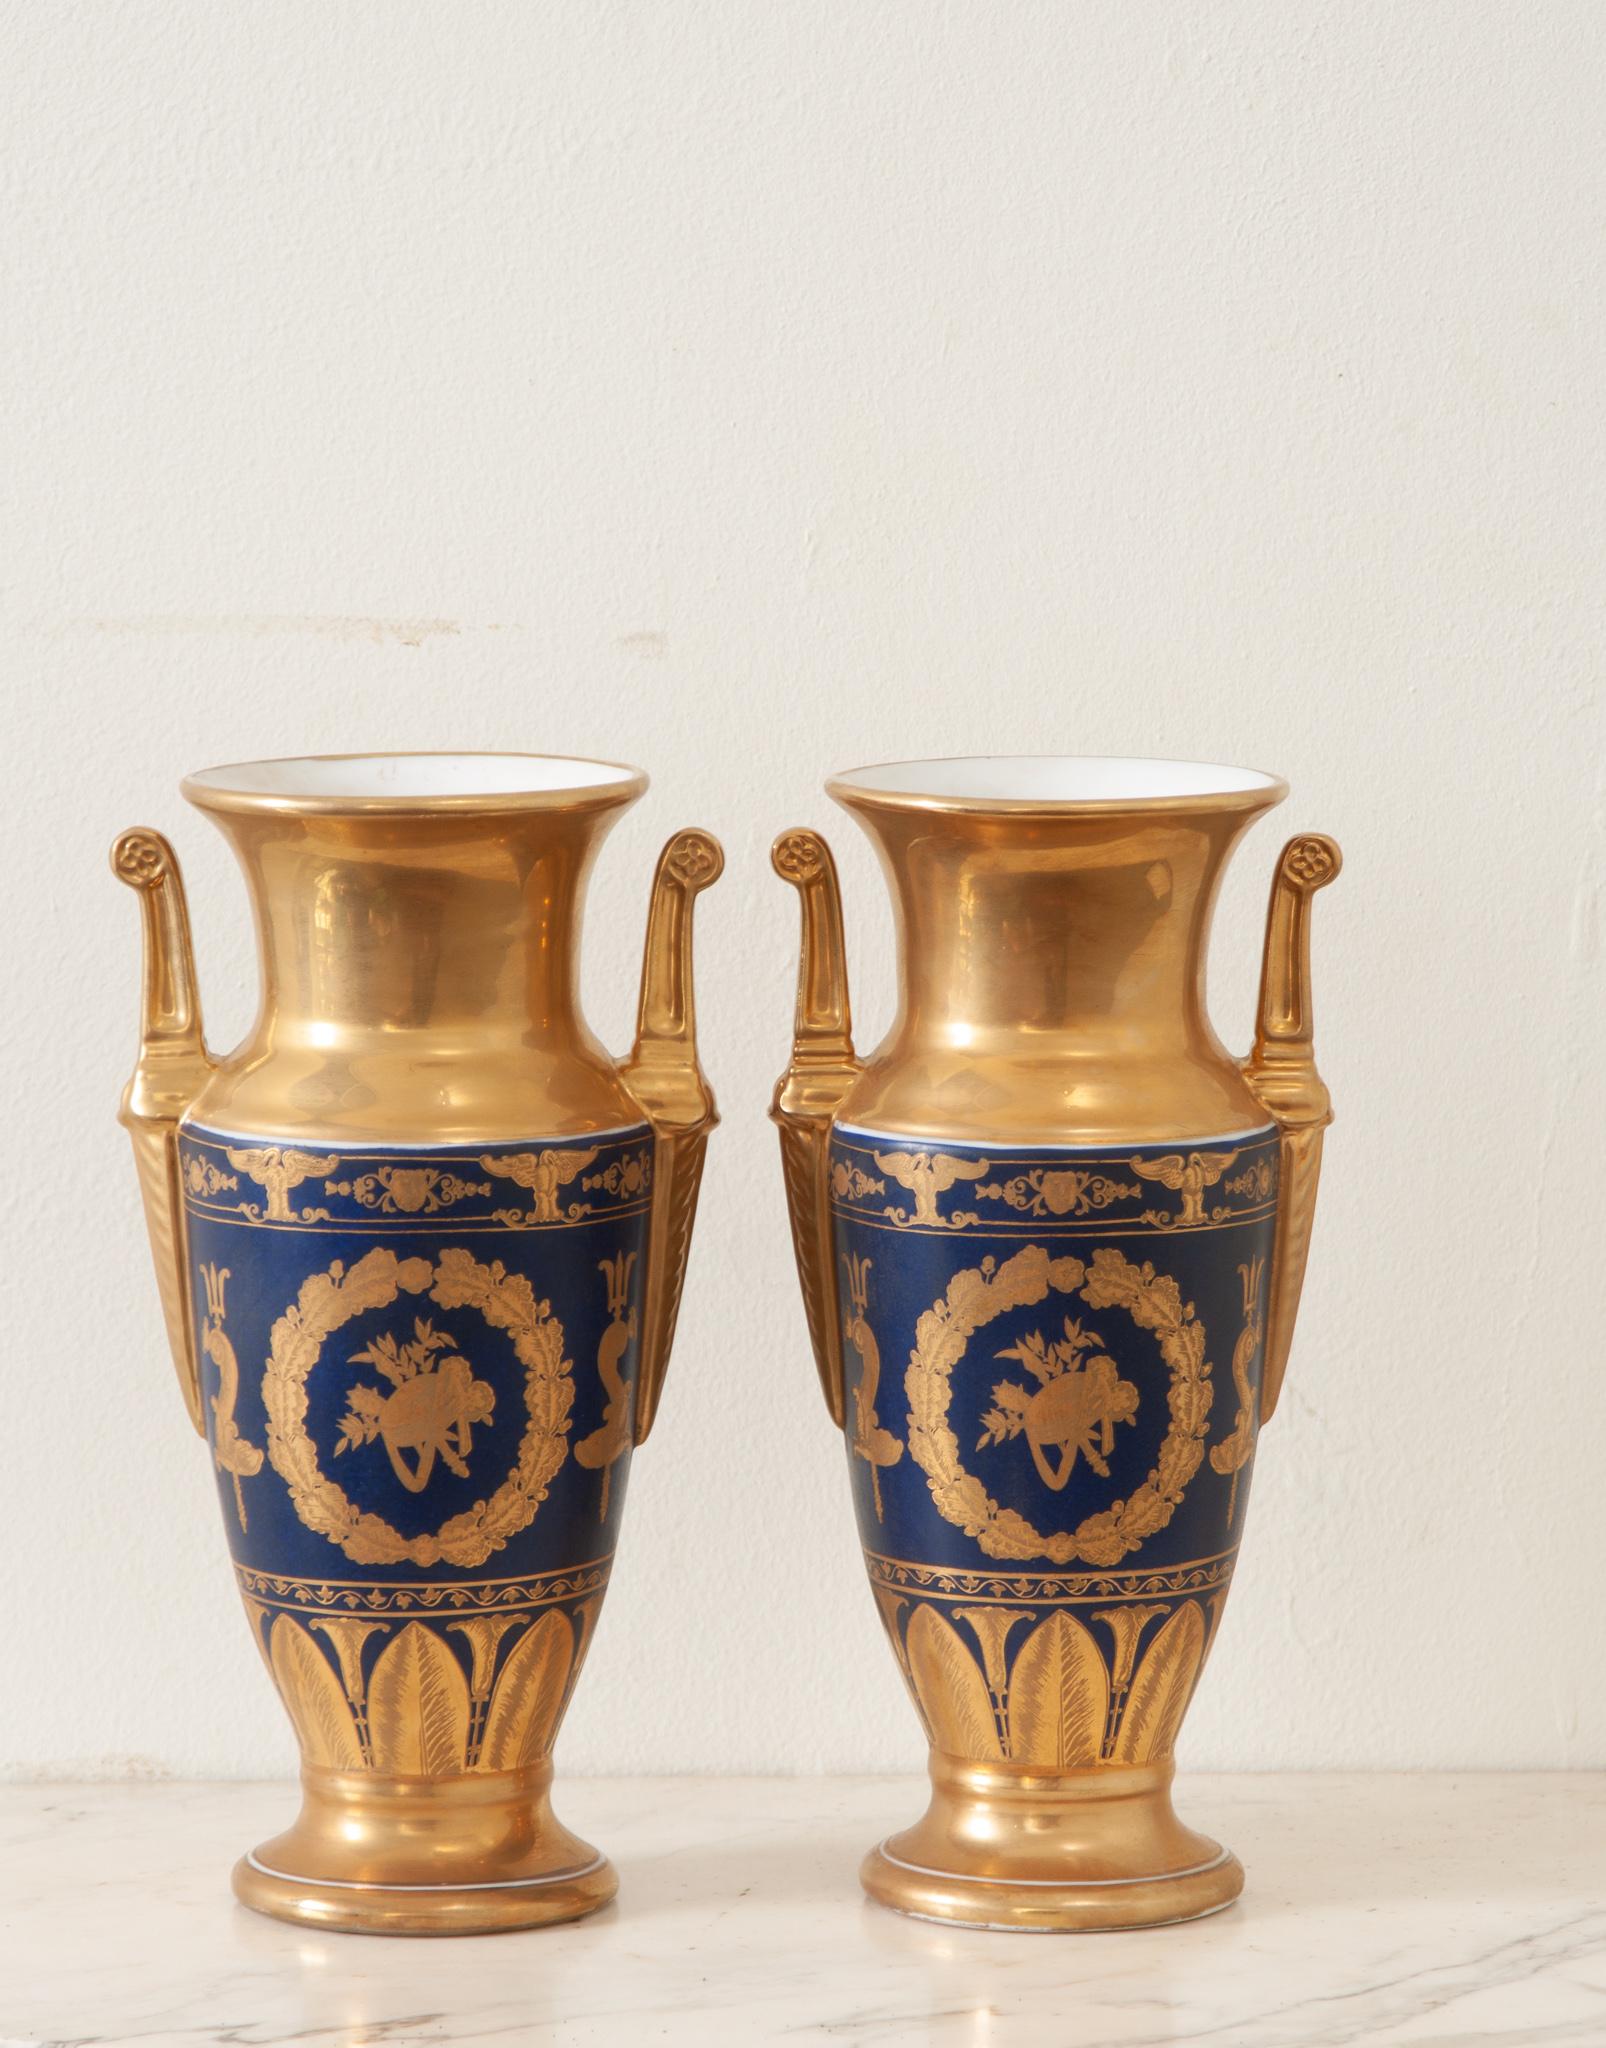 An impressive petite pair of Napoleon III Style vases. This newly made pair of vases are in wonderful condition and have a lustrous gold gilt finish. Be sure to view the detailed images for a closer look. Sold as a pair. 